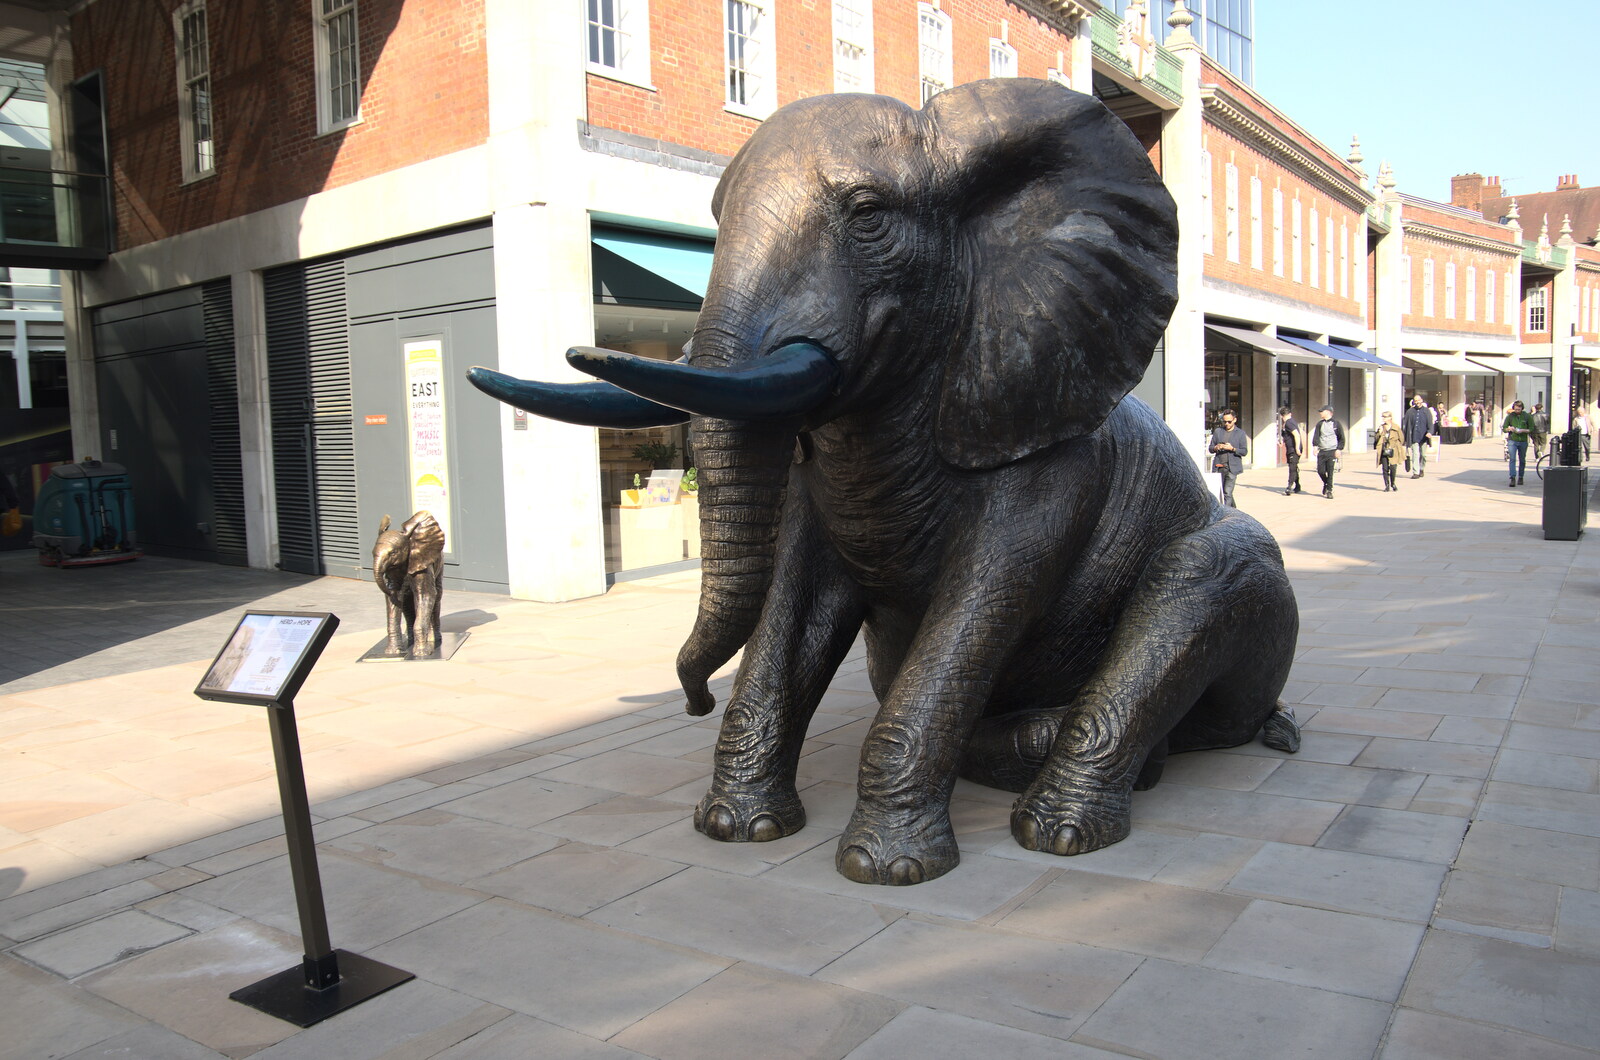 There's a newish elephant statue outside Spitalfields from Genesis at the O2, North Greenwich, London - 24th March 2022